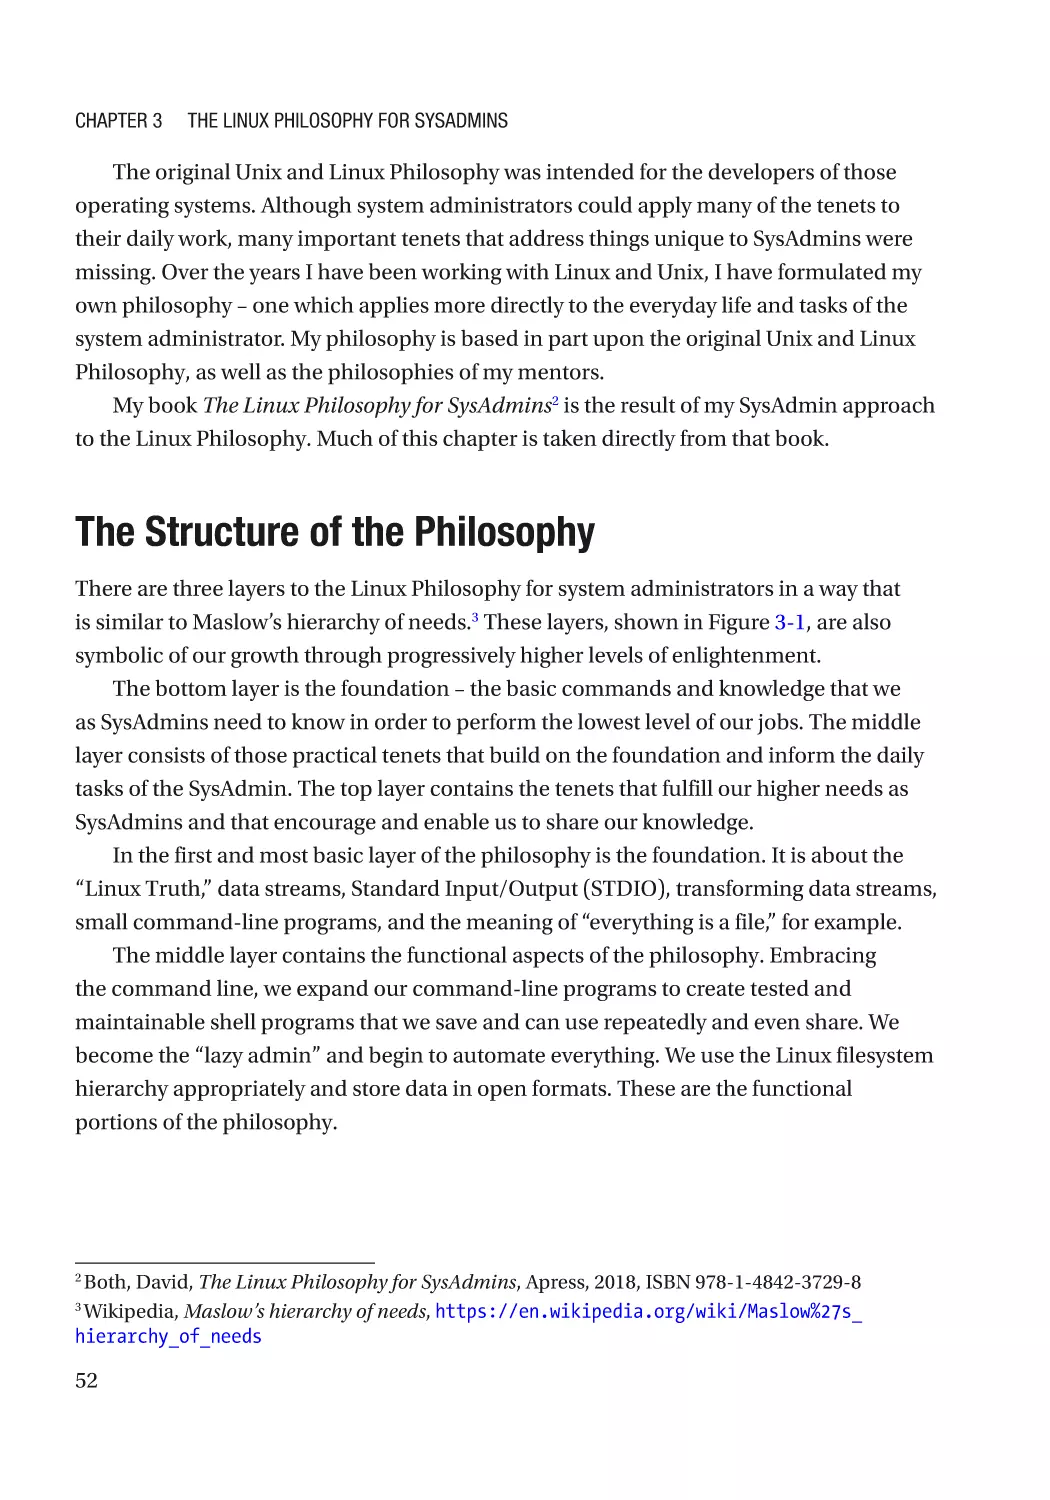 The Structure of the Philosophy